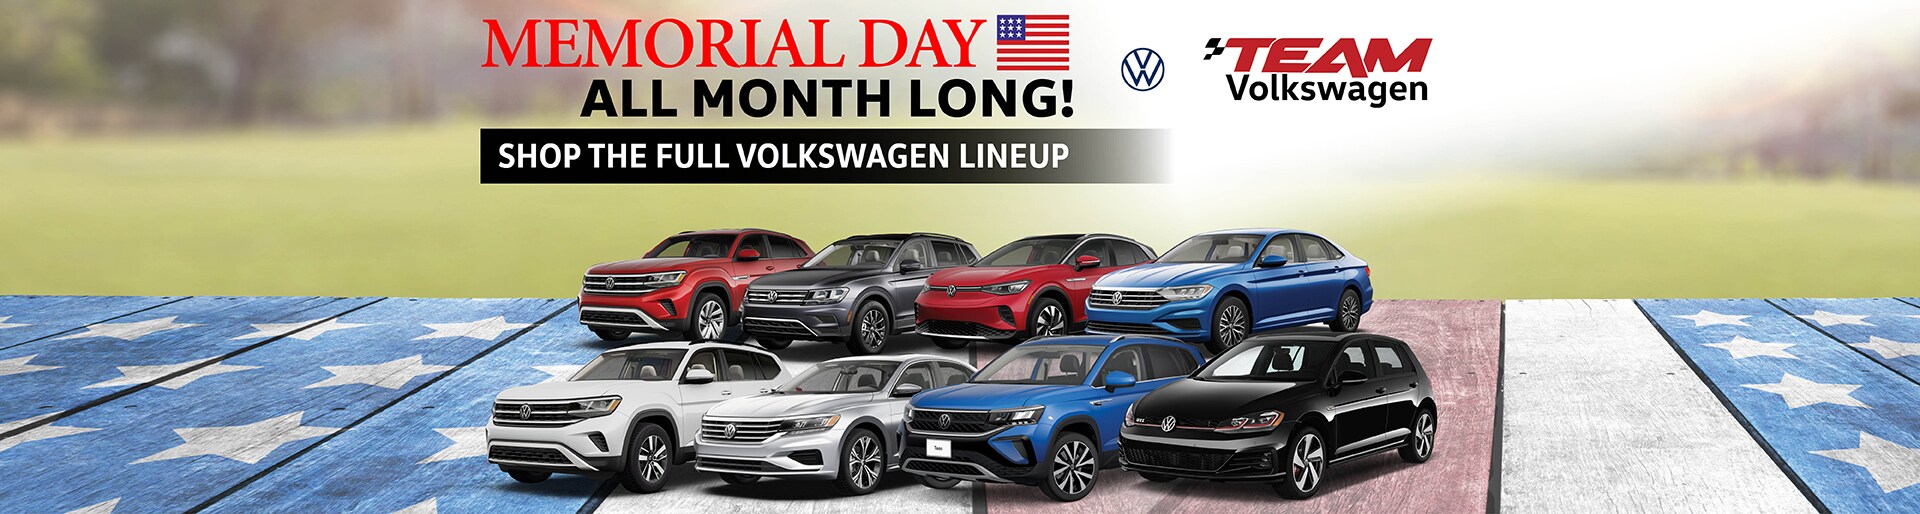 Shop the full Volkswagen lineup this Memorial Day month